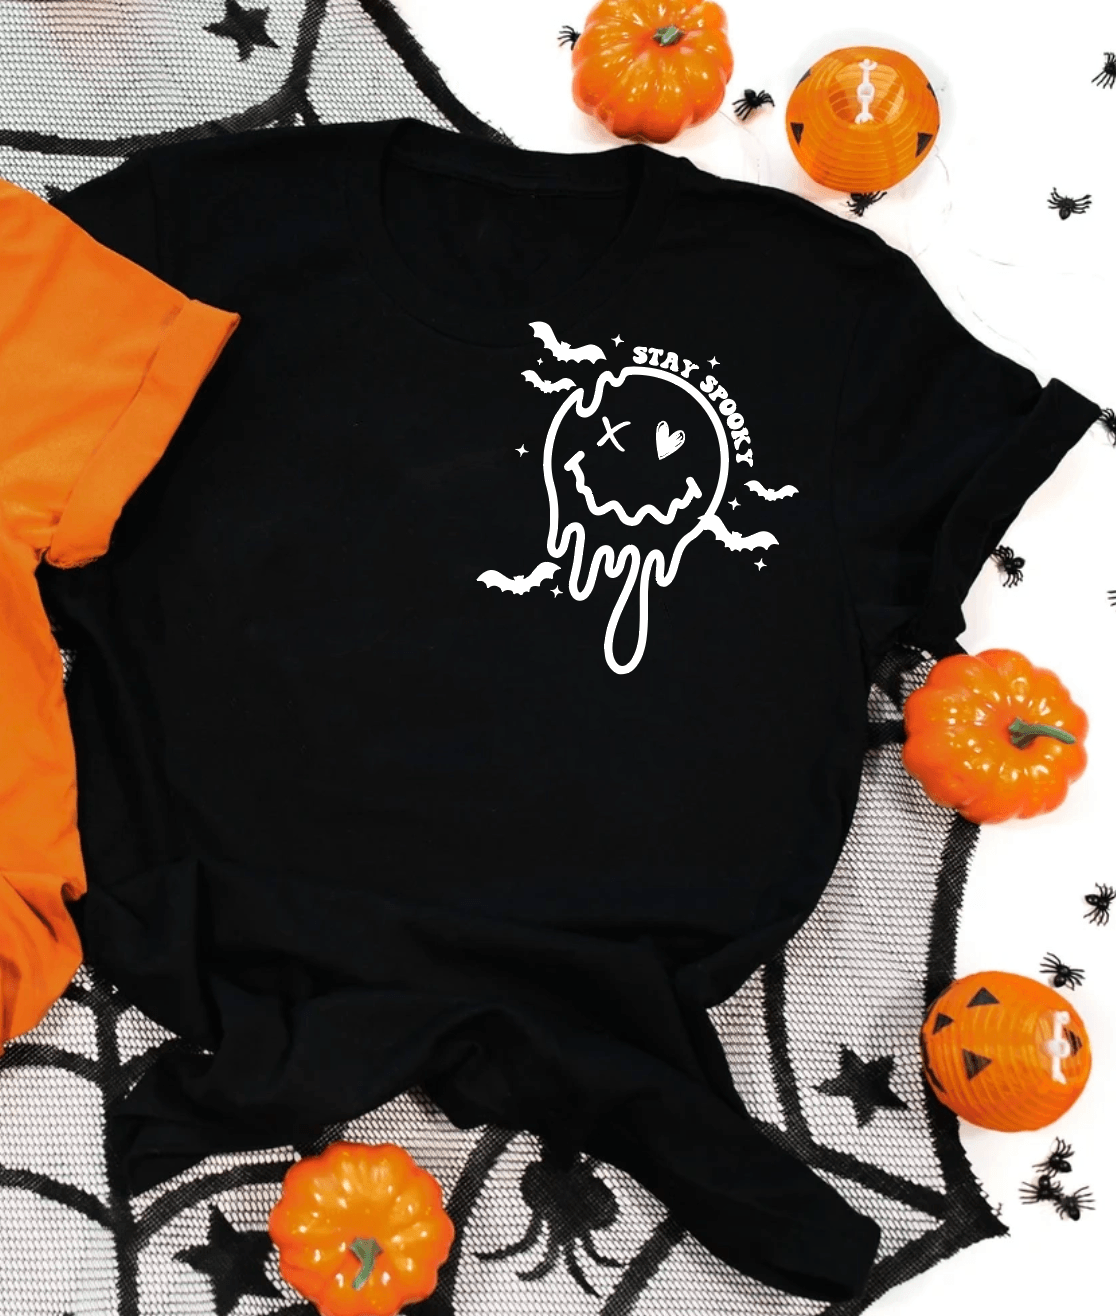 Stay Spooky(Black pocket tee) - Signastyle Boutique